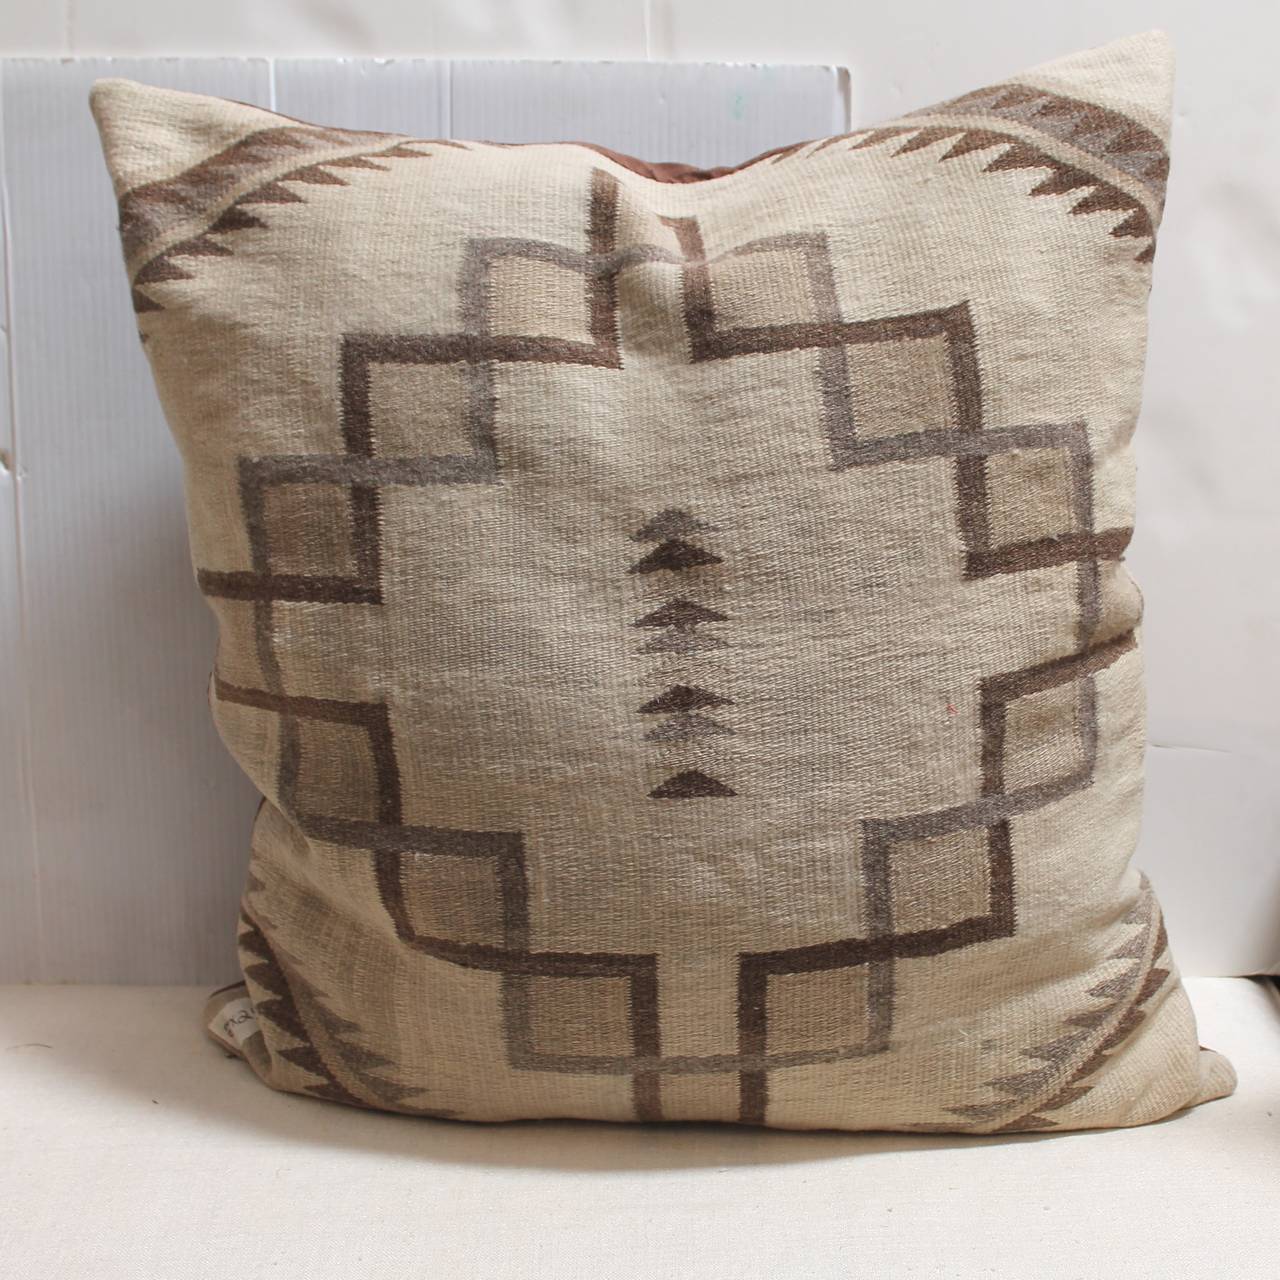 This is a wonderful pattern in this weaving and great size pillow. Good for a large sofa or head board bed pillows. The backing is in chocolate cotton linen.